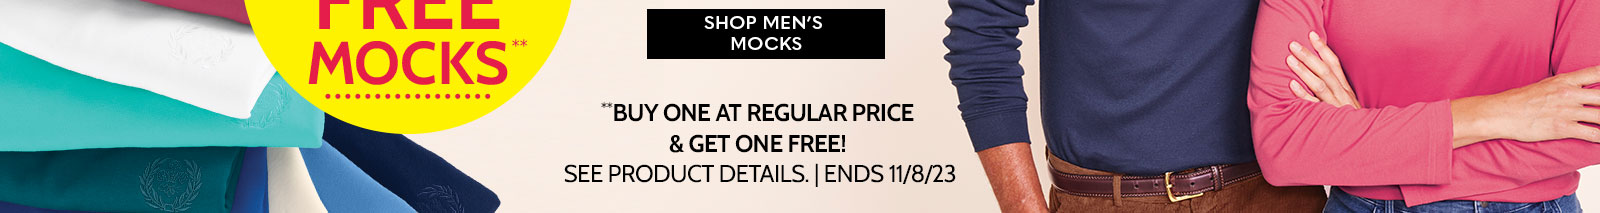 wow! a really big deal bogo free mocks** mix & match it's mock madness! you can mix & match women's & men's mocks for this great bogo! shop men's mocks **buy one at regular price & get one free! see product details | ends 11/8/23